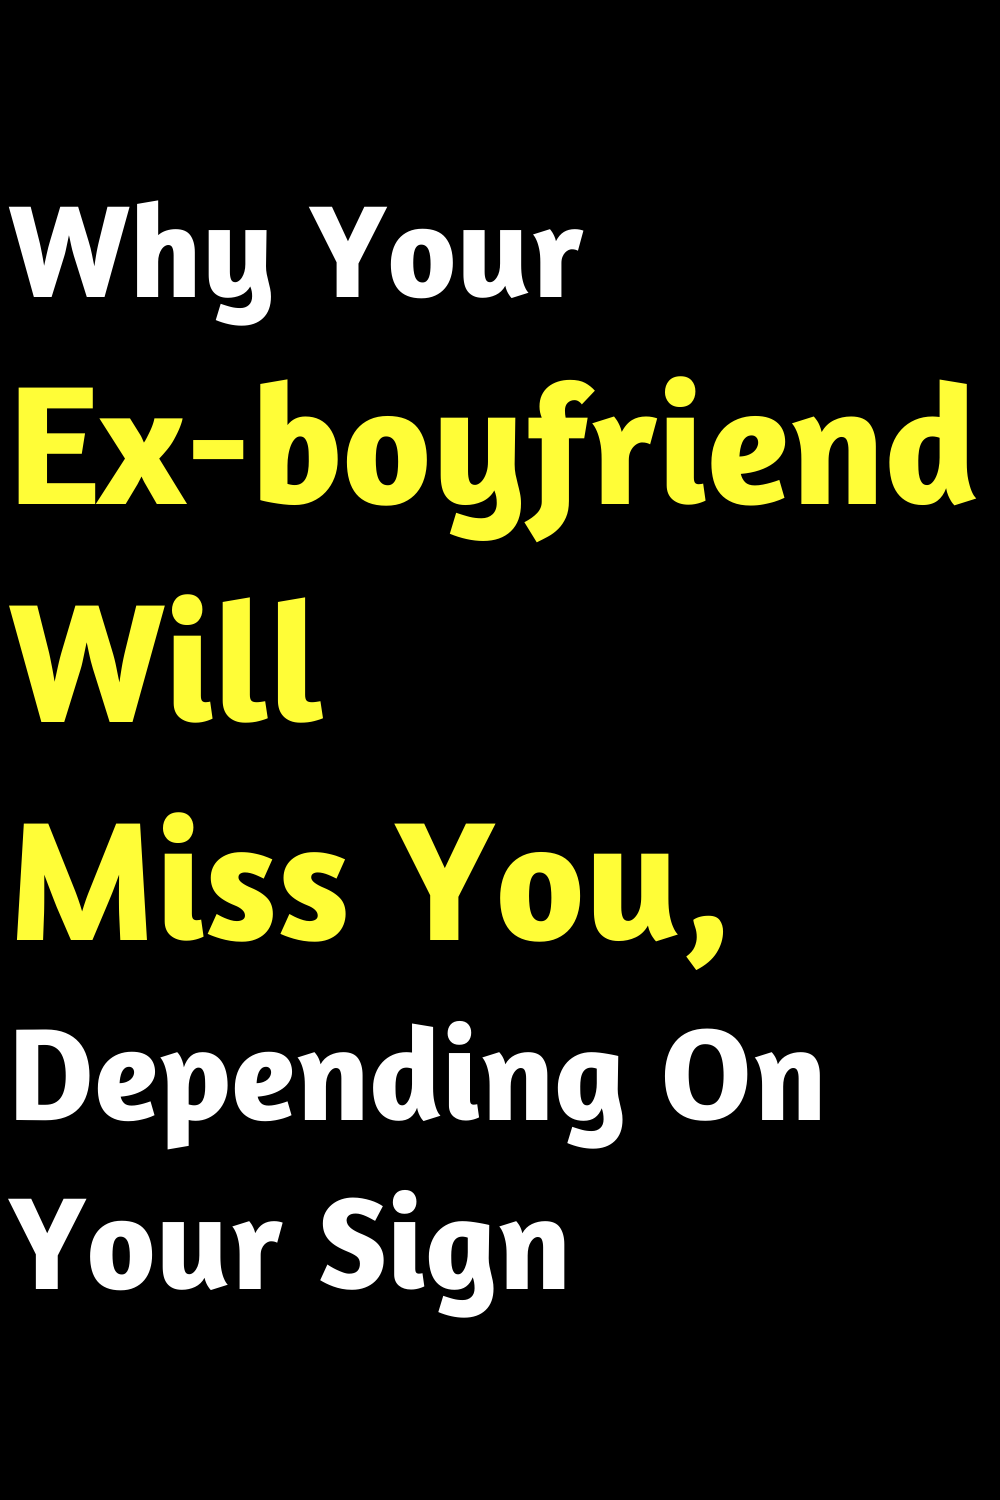 Why Your Ex-boyfriend Will Miss You, Depending On Your Sign